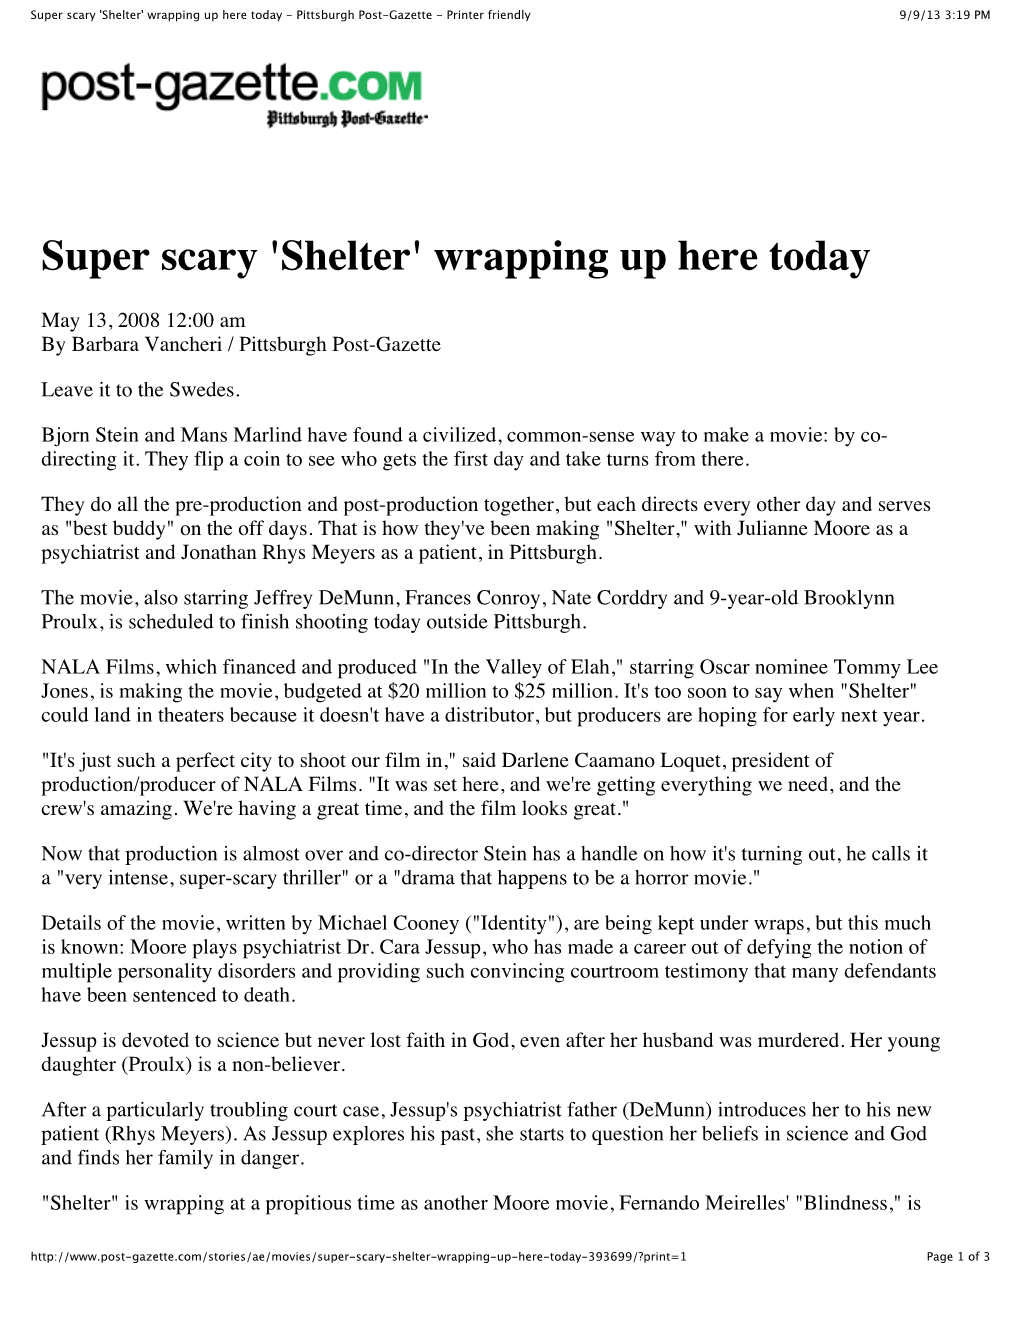 Super Scary 'Shelter' Wrapping up Here Today - Pittsburgh Post-Gazette - Printer Friendly 9/9/13 3:19 PM